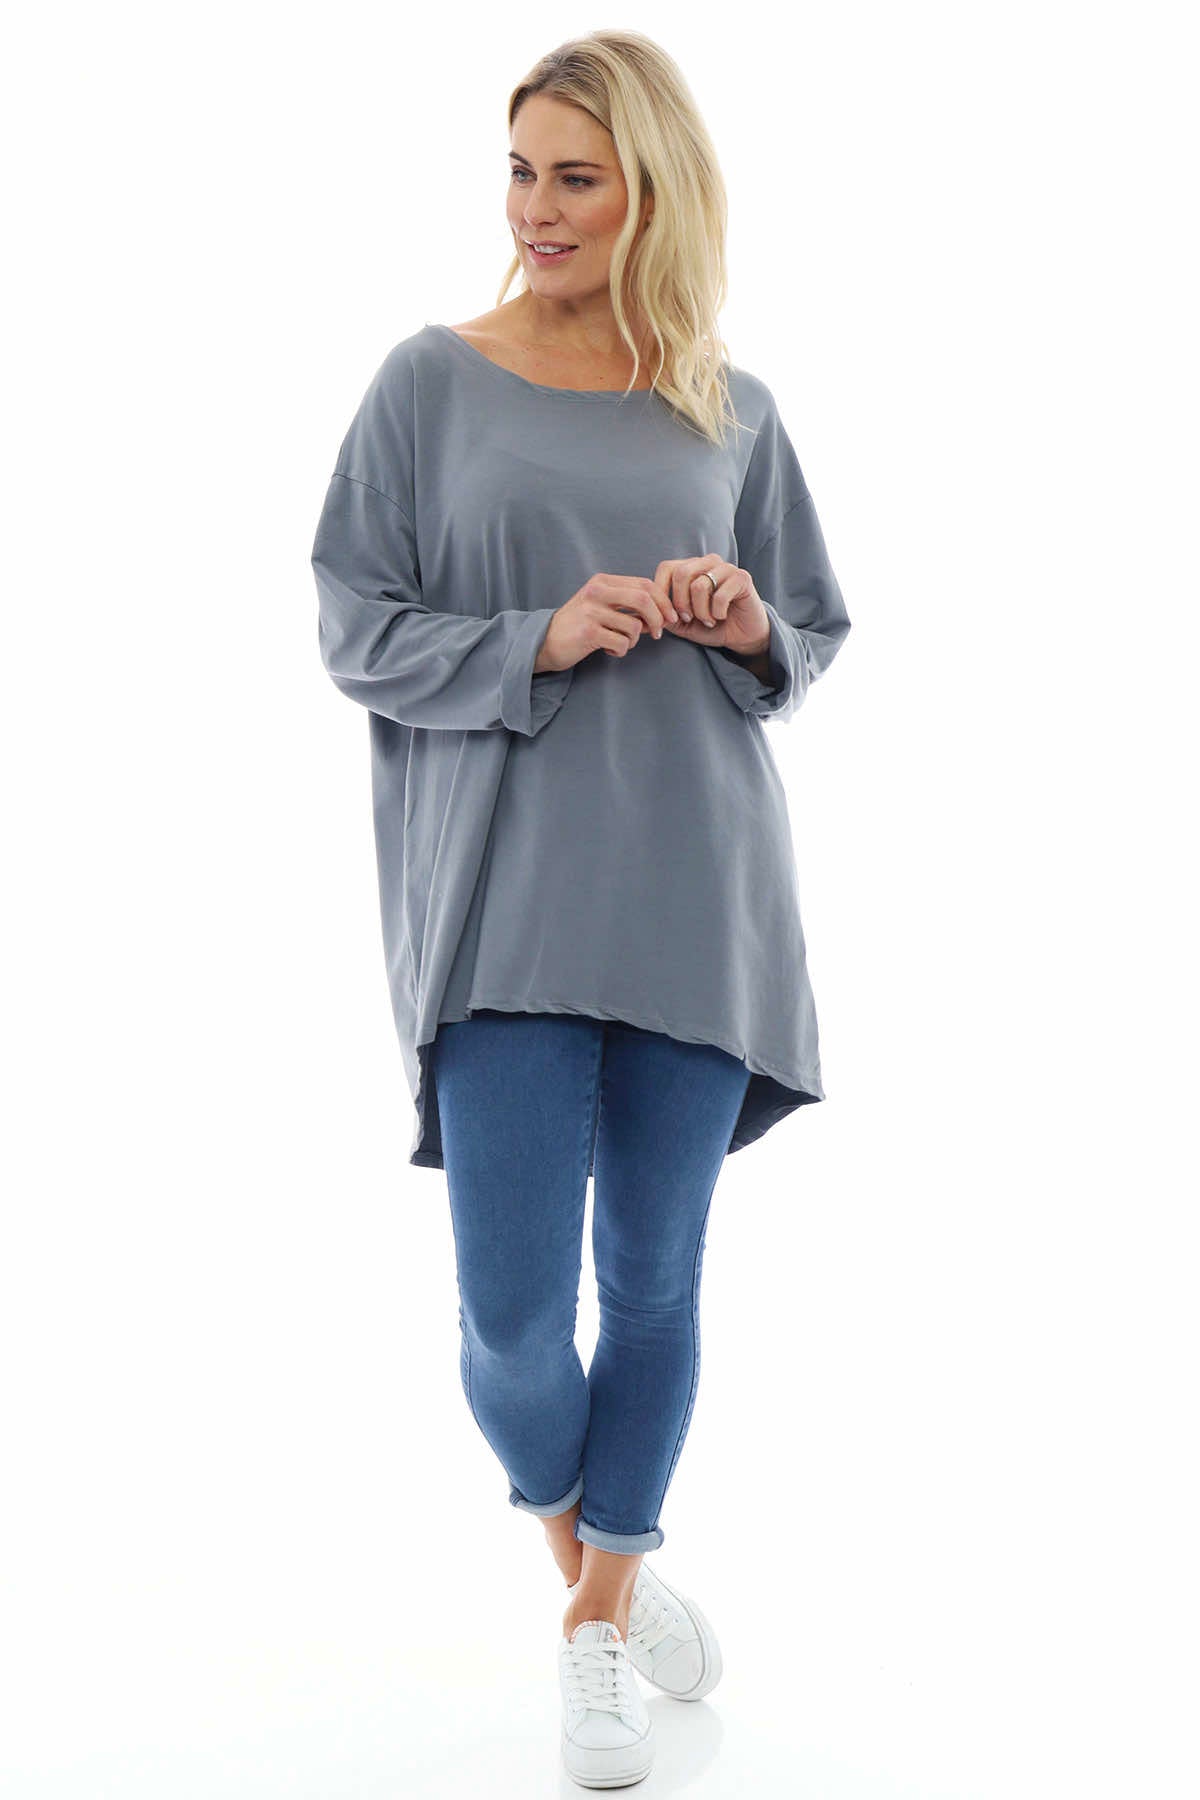 Guinevere Cotton Top Mid Grey